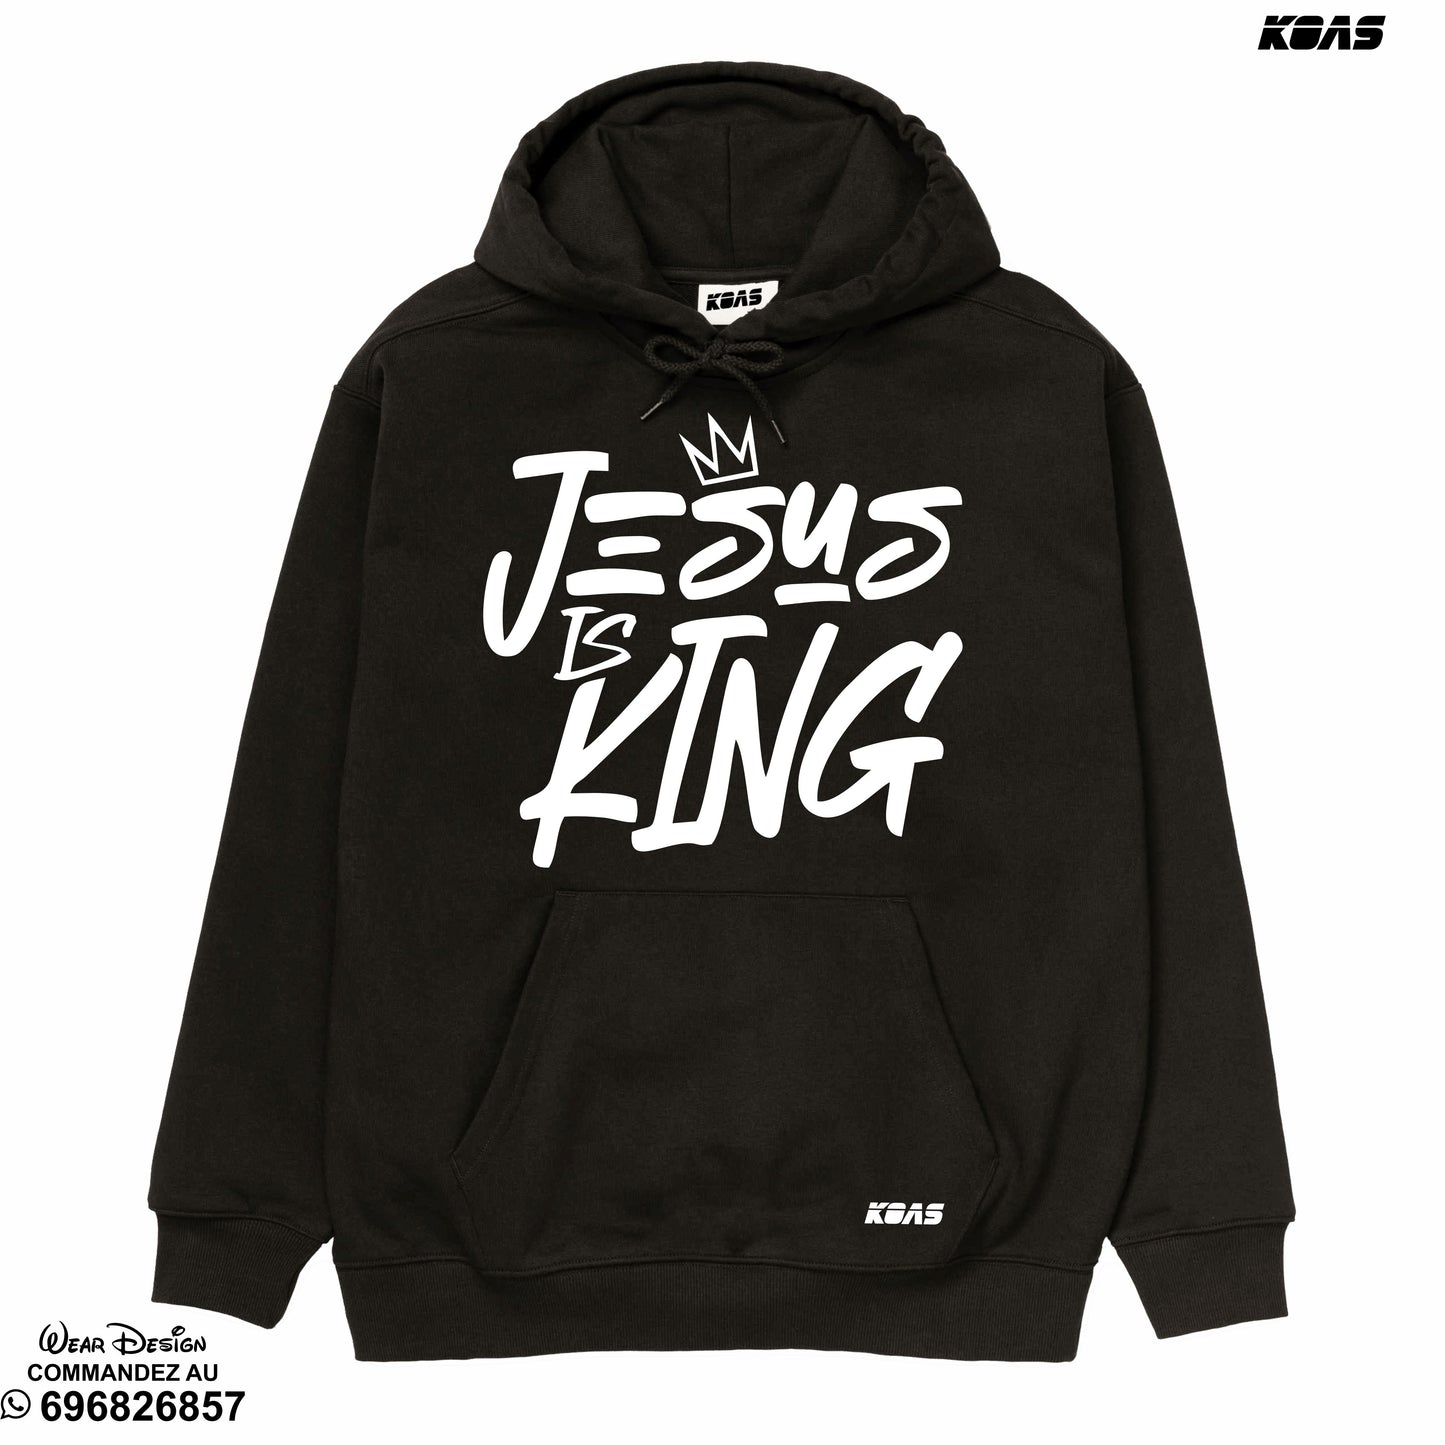 Jésus is king - Pull